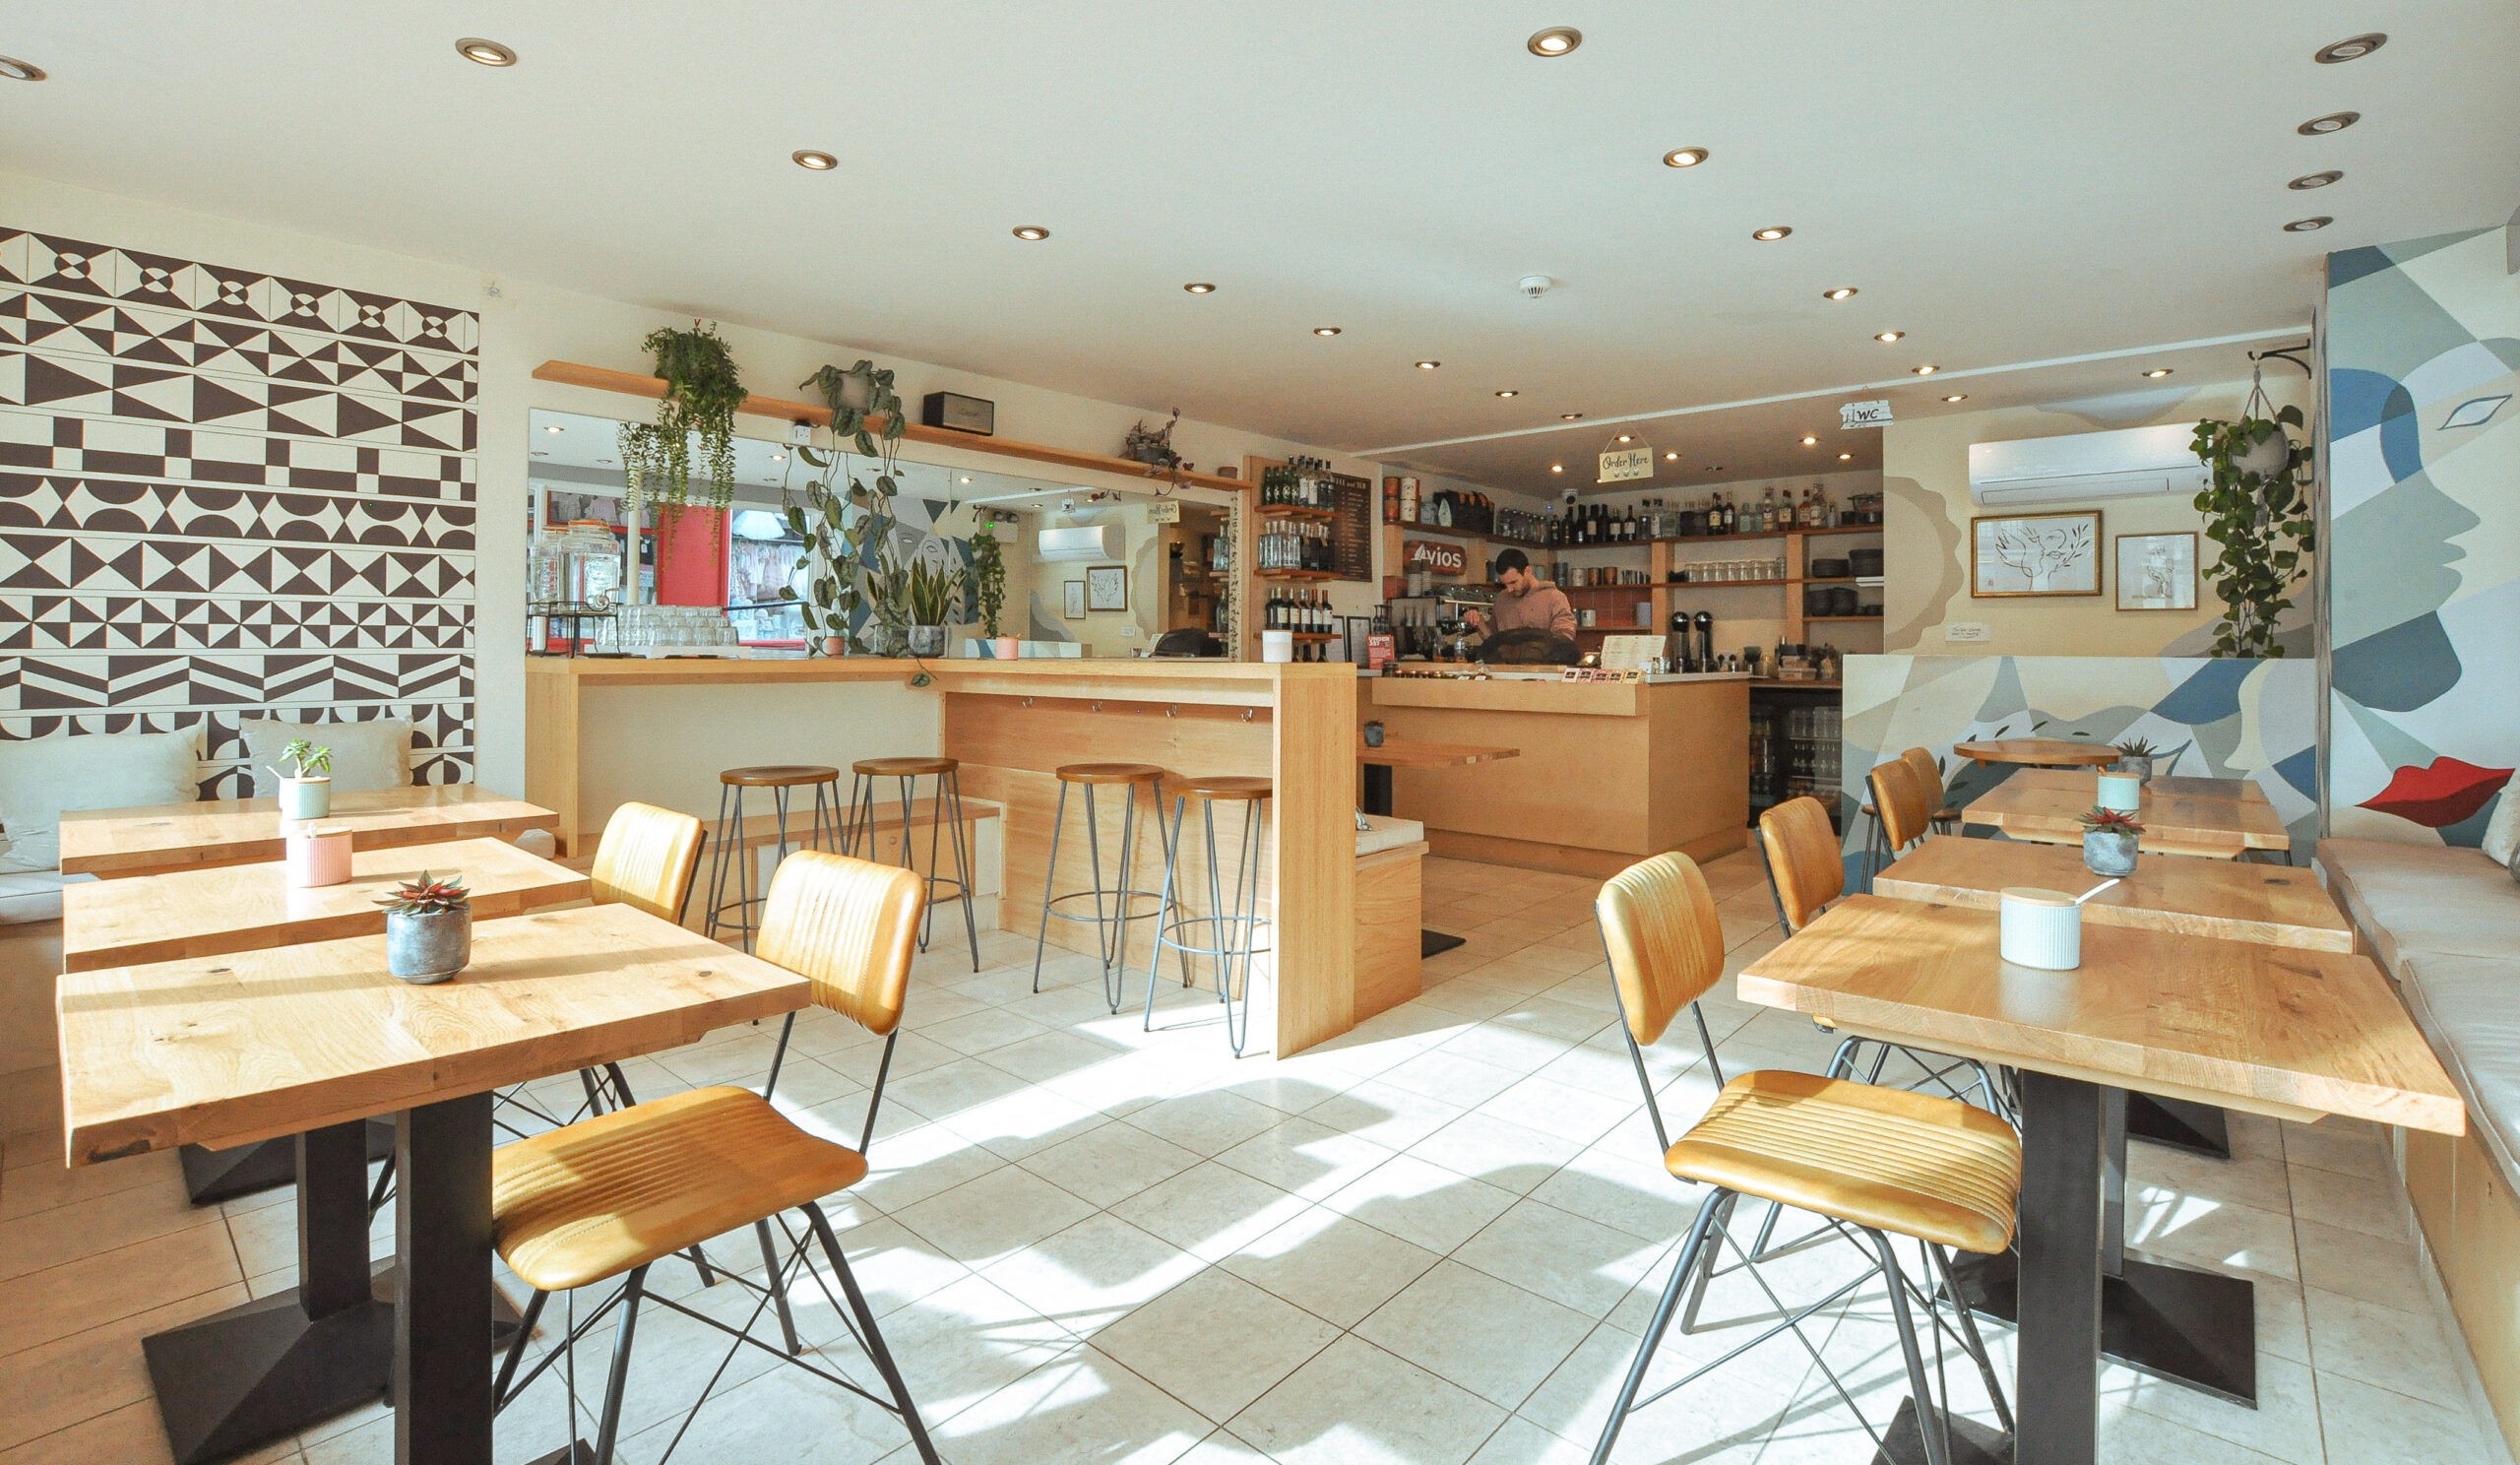 interior shot of the Vios Cafe in Brighton. Light brown wooden furniture, small plants on the tables and wall decorated with art